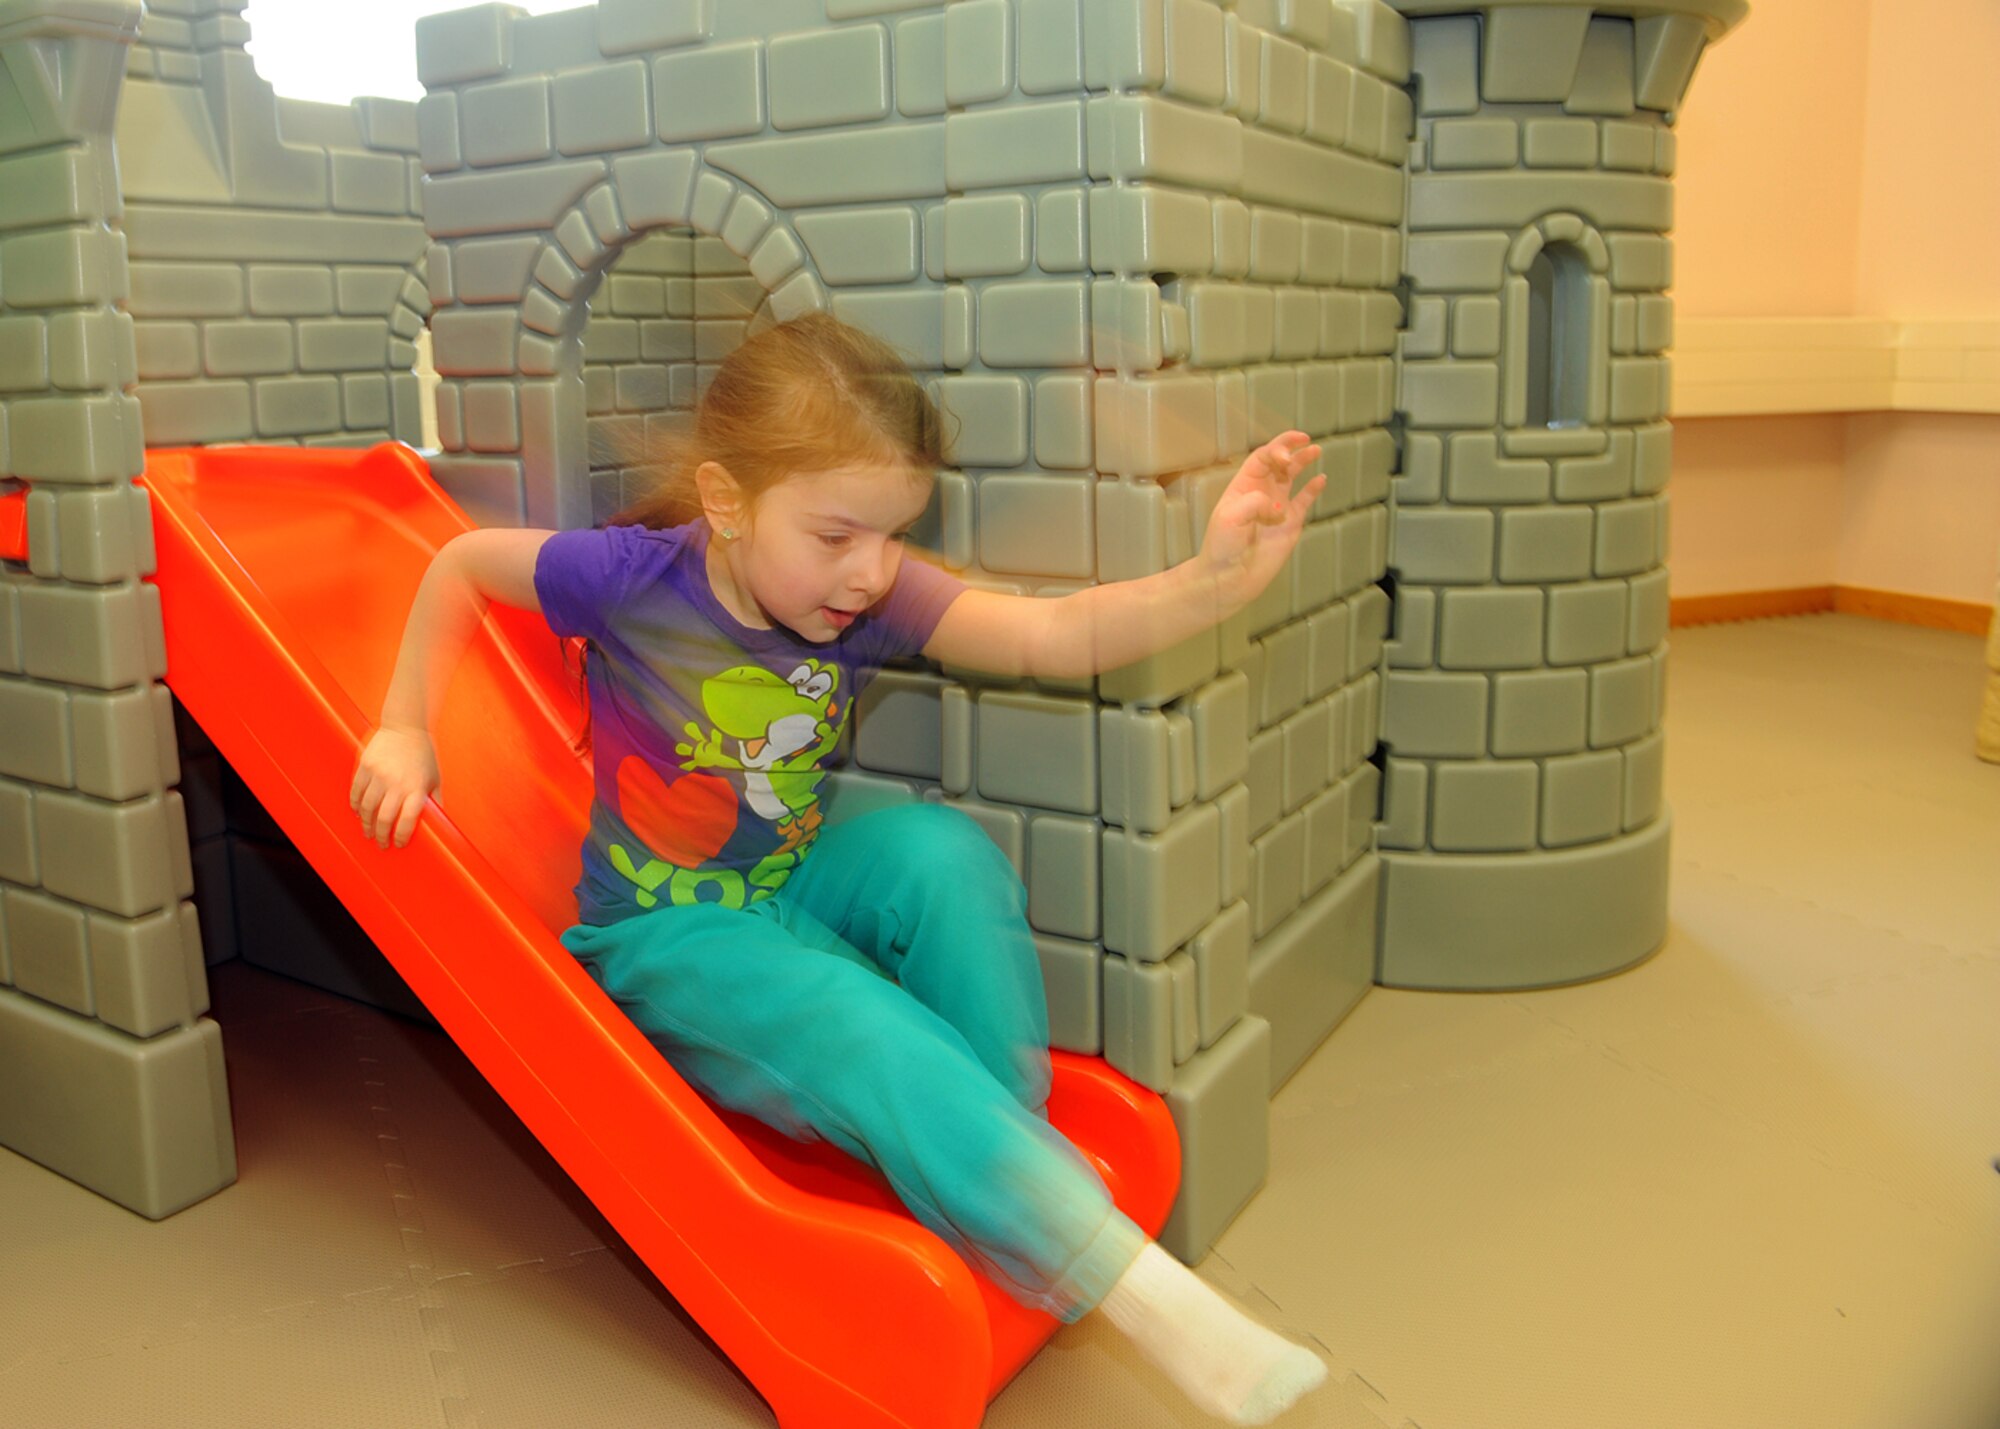 SPANGDAHLEM AIR BASE, Germany -- Allison Aiken, daughter of U.S. Air Force Master Sgt. Patrick Aiken, 52nd Component Maintenance Squadron, slides down from a children’s castle April 2, 2013, after the opening ceremony for Spangdahlem Air Base’s new child playroom. The 52nd Civil Engineer Squadron renovated the room, and the funds for the play items came from the Spangdahlem Spouses and Enlisted Members Club; Officers and Civilian Spouses Club; and the Bitburg Middle School Parent Teacher Student Association. (U.S. Air Force photo by Staff Sgt. Daryl Knee/Released)